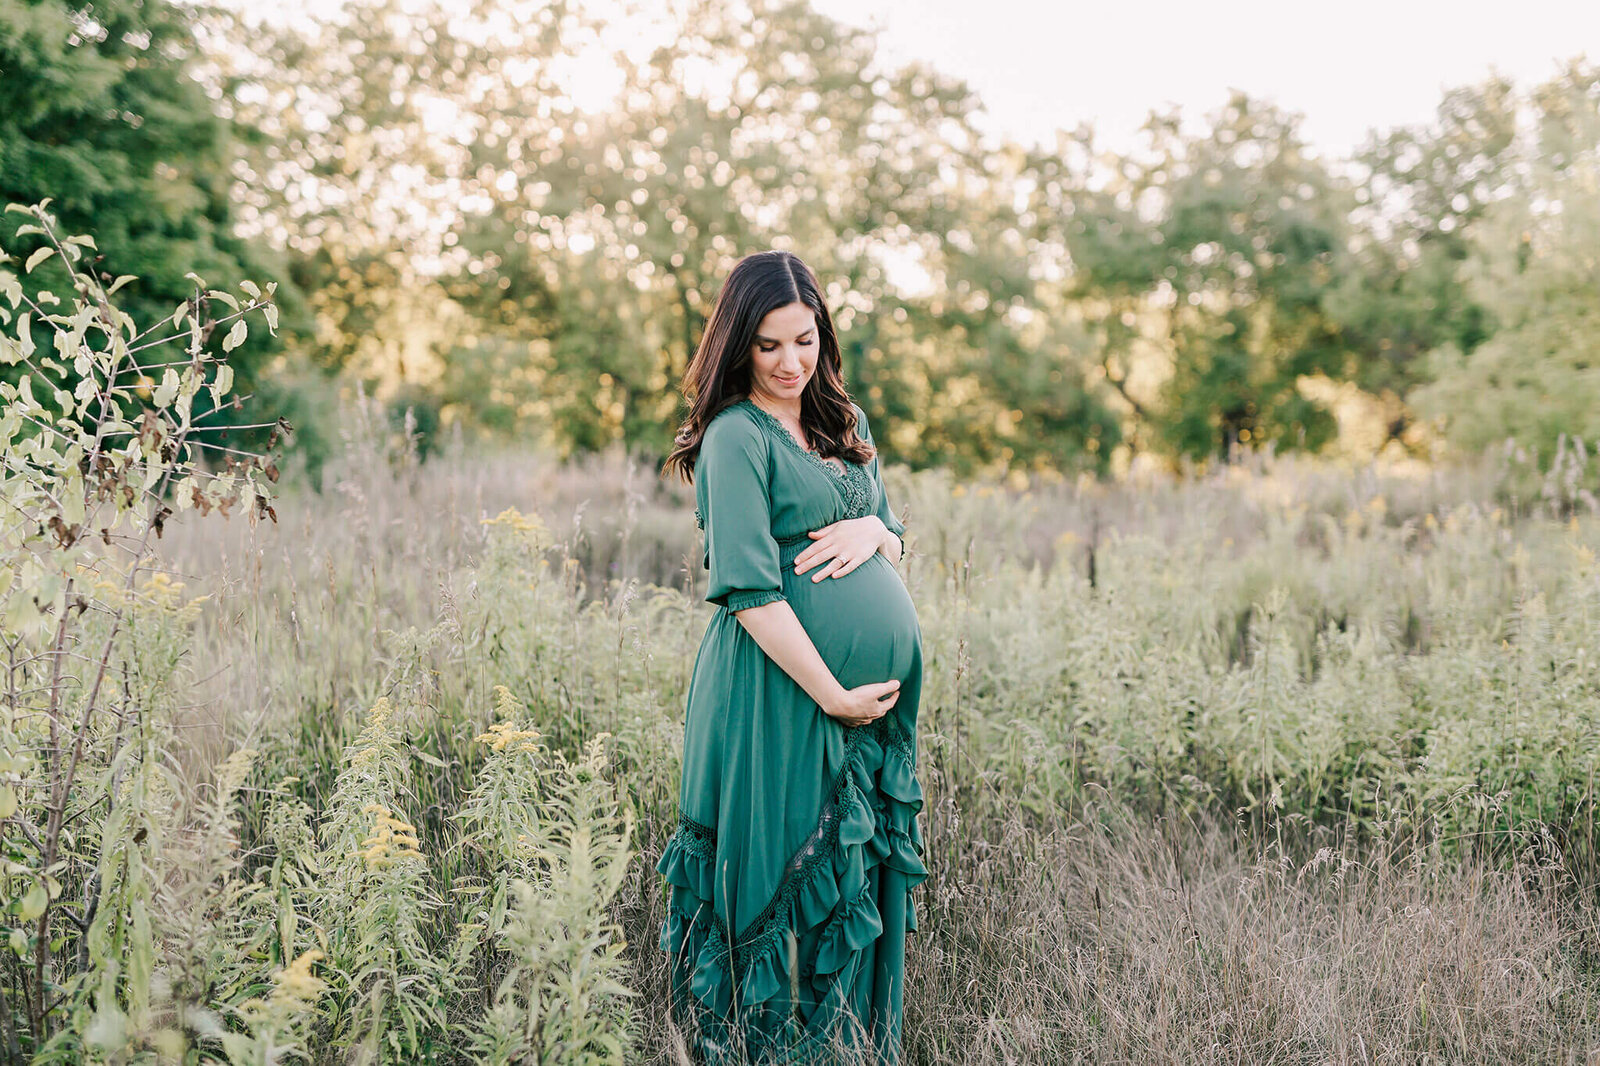 Mother to be in a green Baltic Born dress wholes her baby belly with with both hands.